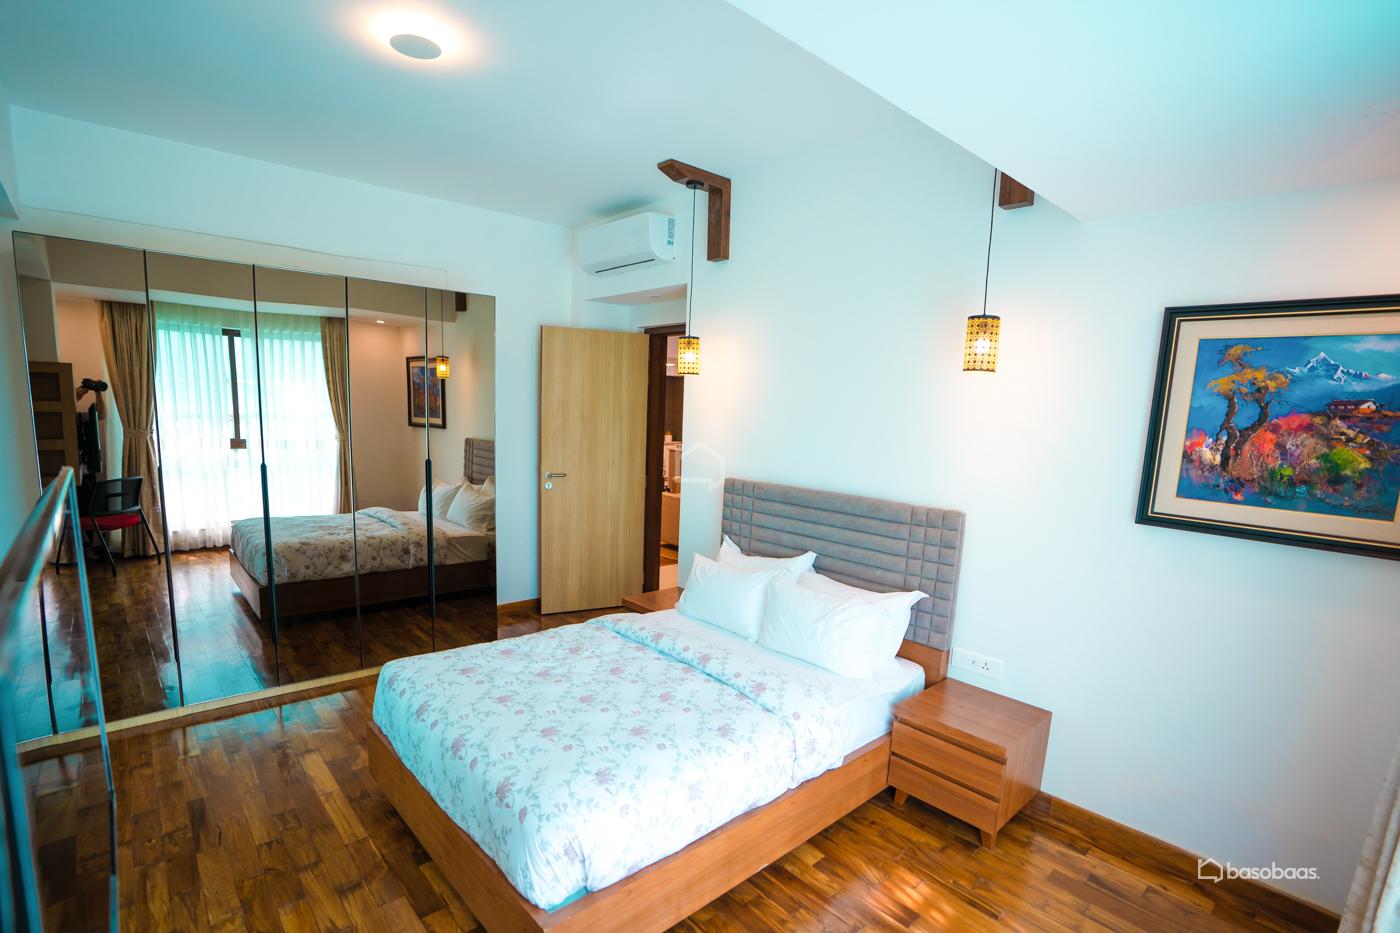 Atithi Suites (A Luxurious Apartment) : Apartment for Sale in Lakeside, Pokhara Image 12